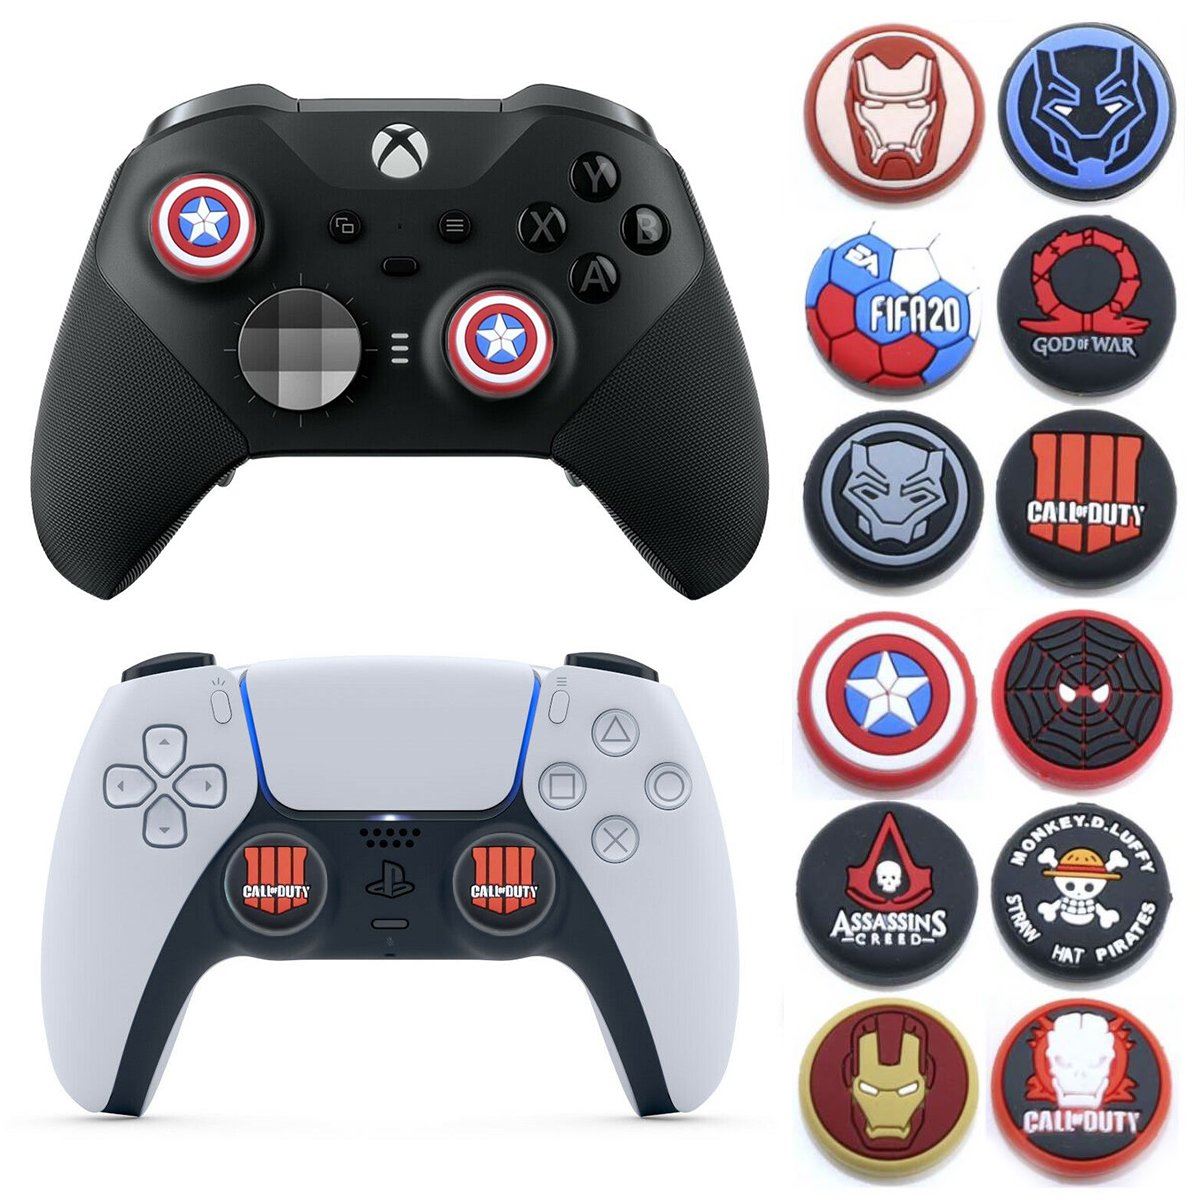 for PS5 / PS4 / Xbox One / Series X|S - 2x Rubber Silicone Thumb Stick Grip Caps